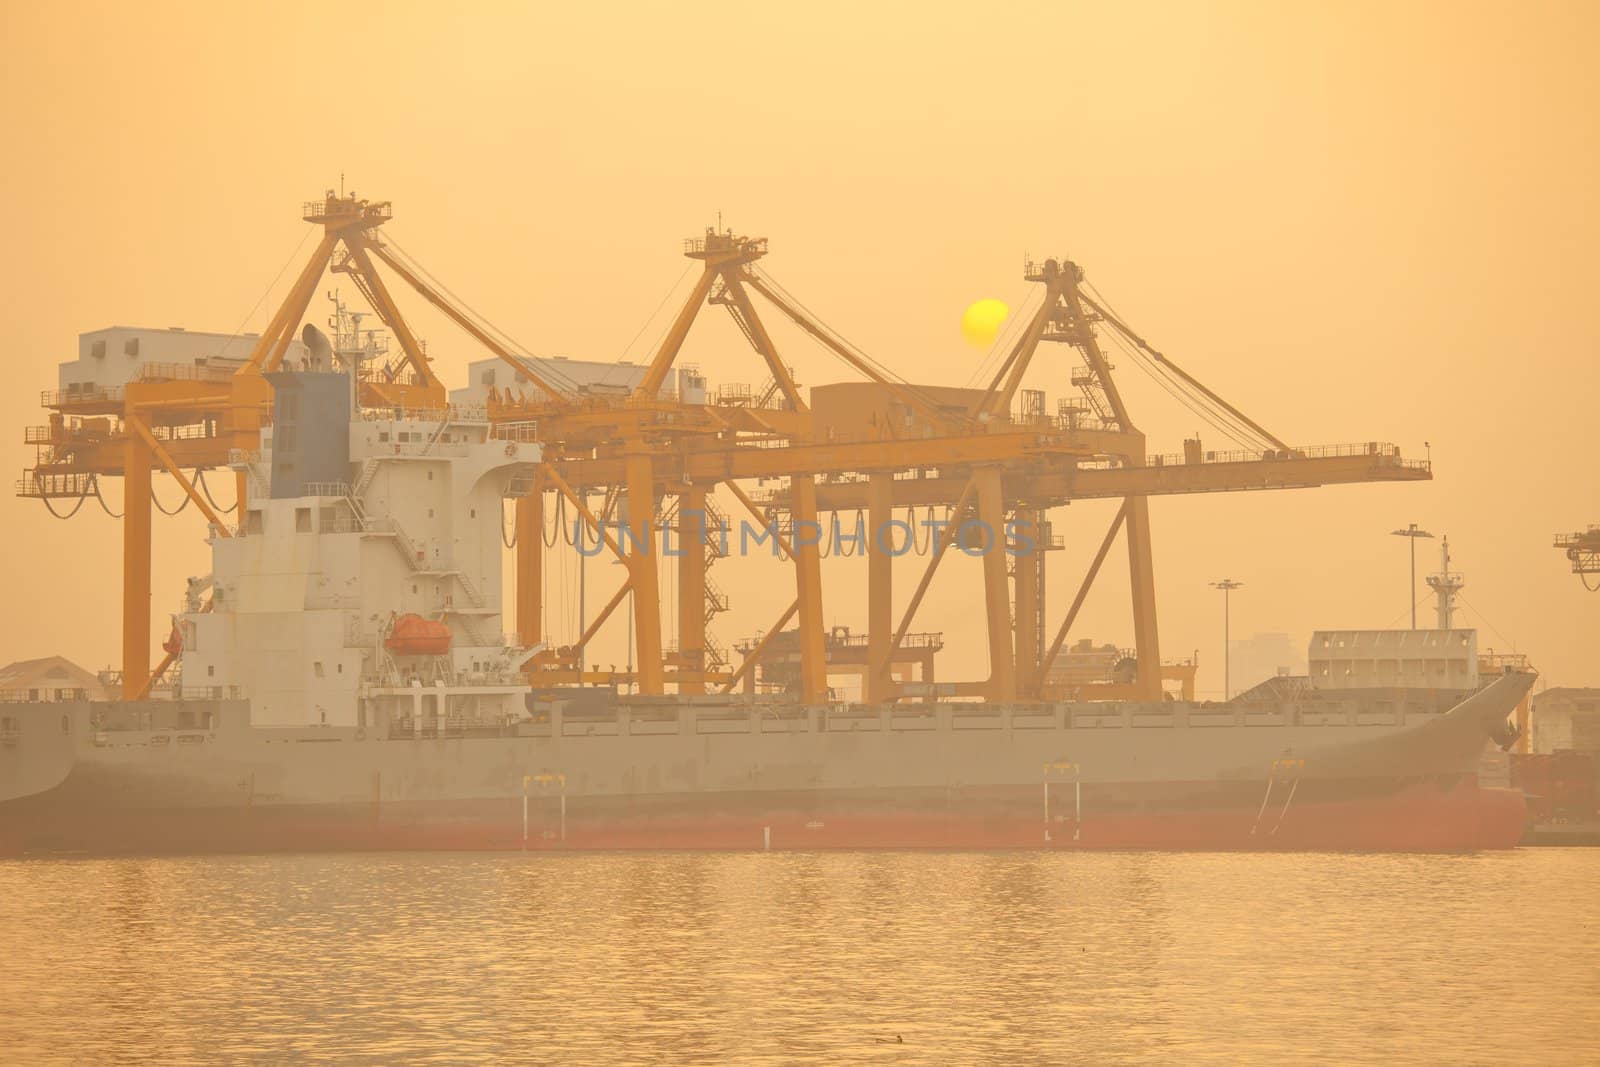 Industrial shipping port on sunset in Bangkok, Thailand